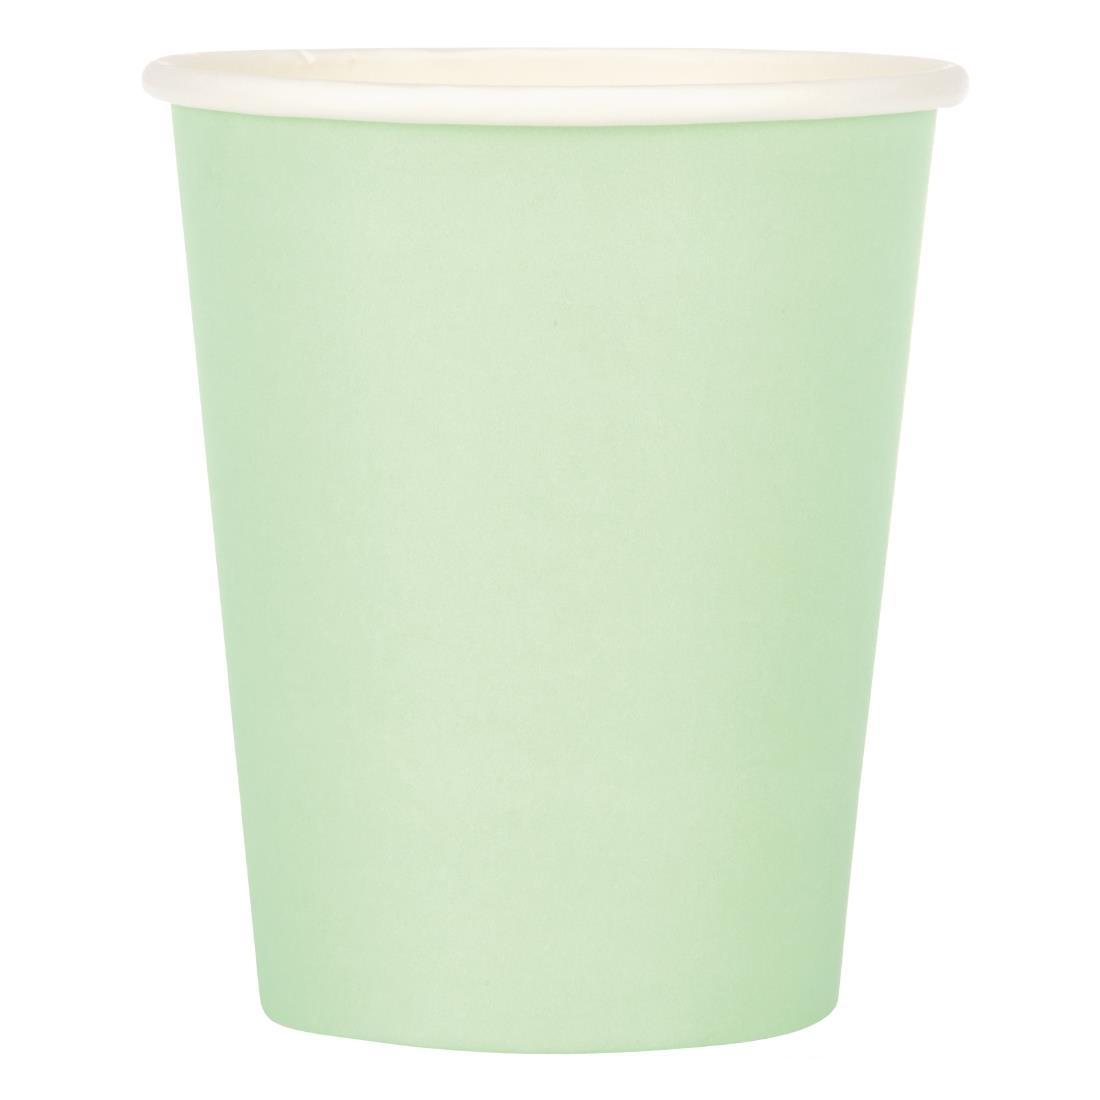 Fiesta Recyclable Coffee Cups Single Wall Turquoise 225ml / 8oz (Pack of 50) - GP400  - 3